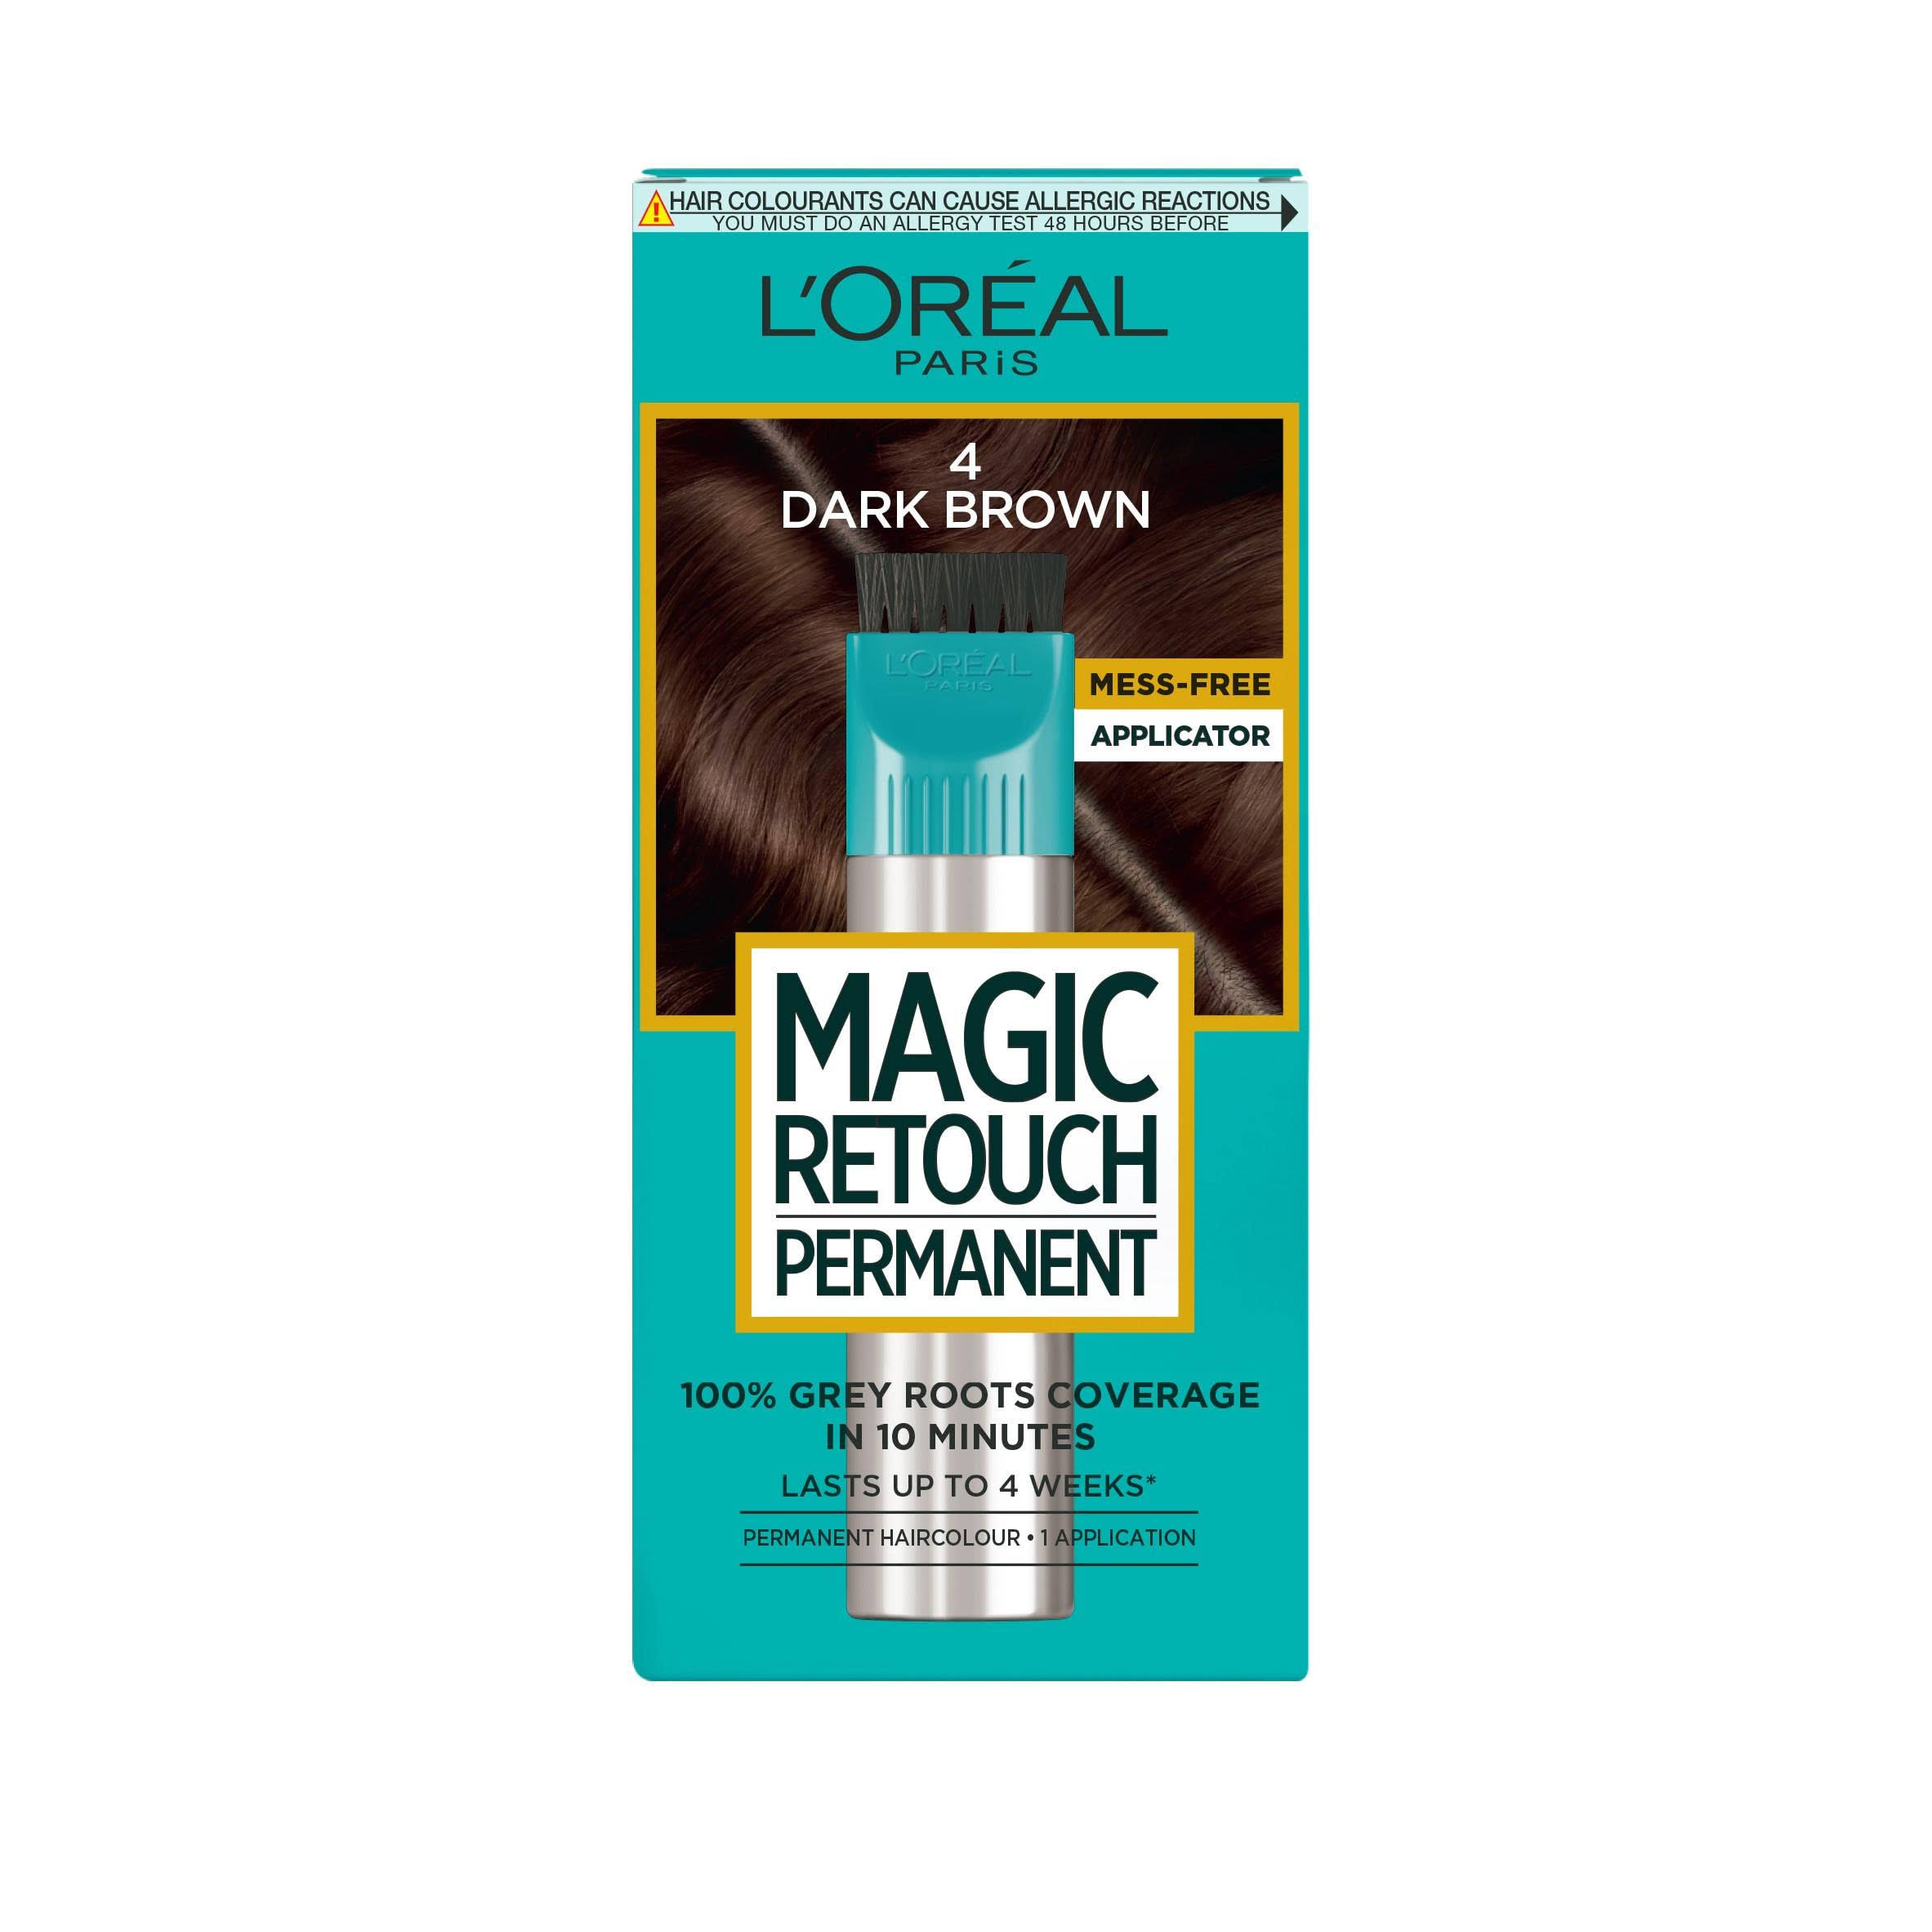 Loreal Magic Retouch Permanent Dark Brown 4 by dpharmacy